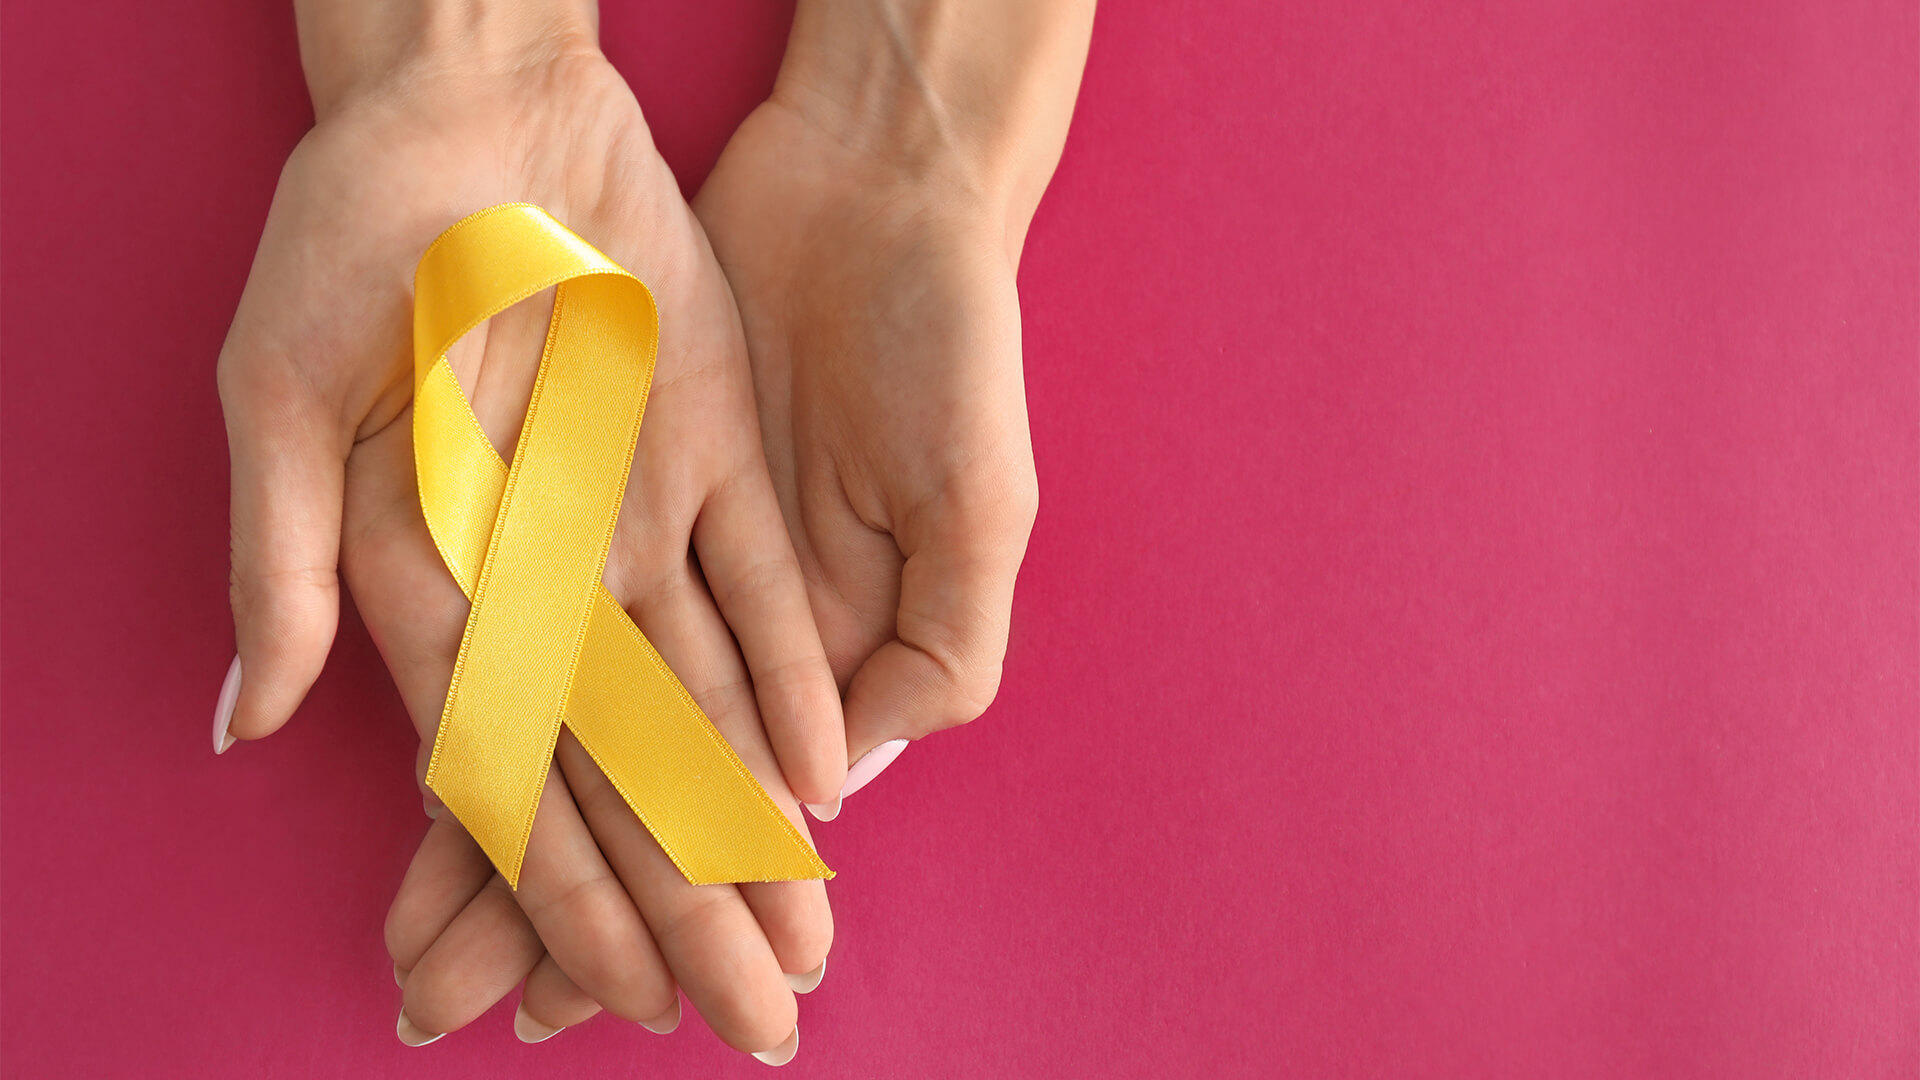 Everything You Need To Know About Endometriosis